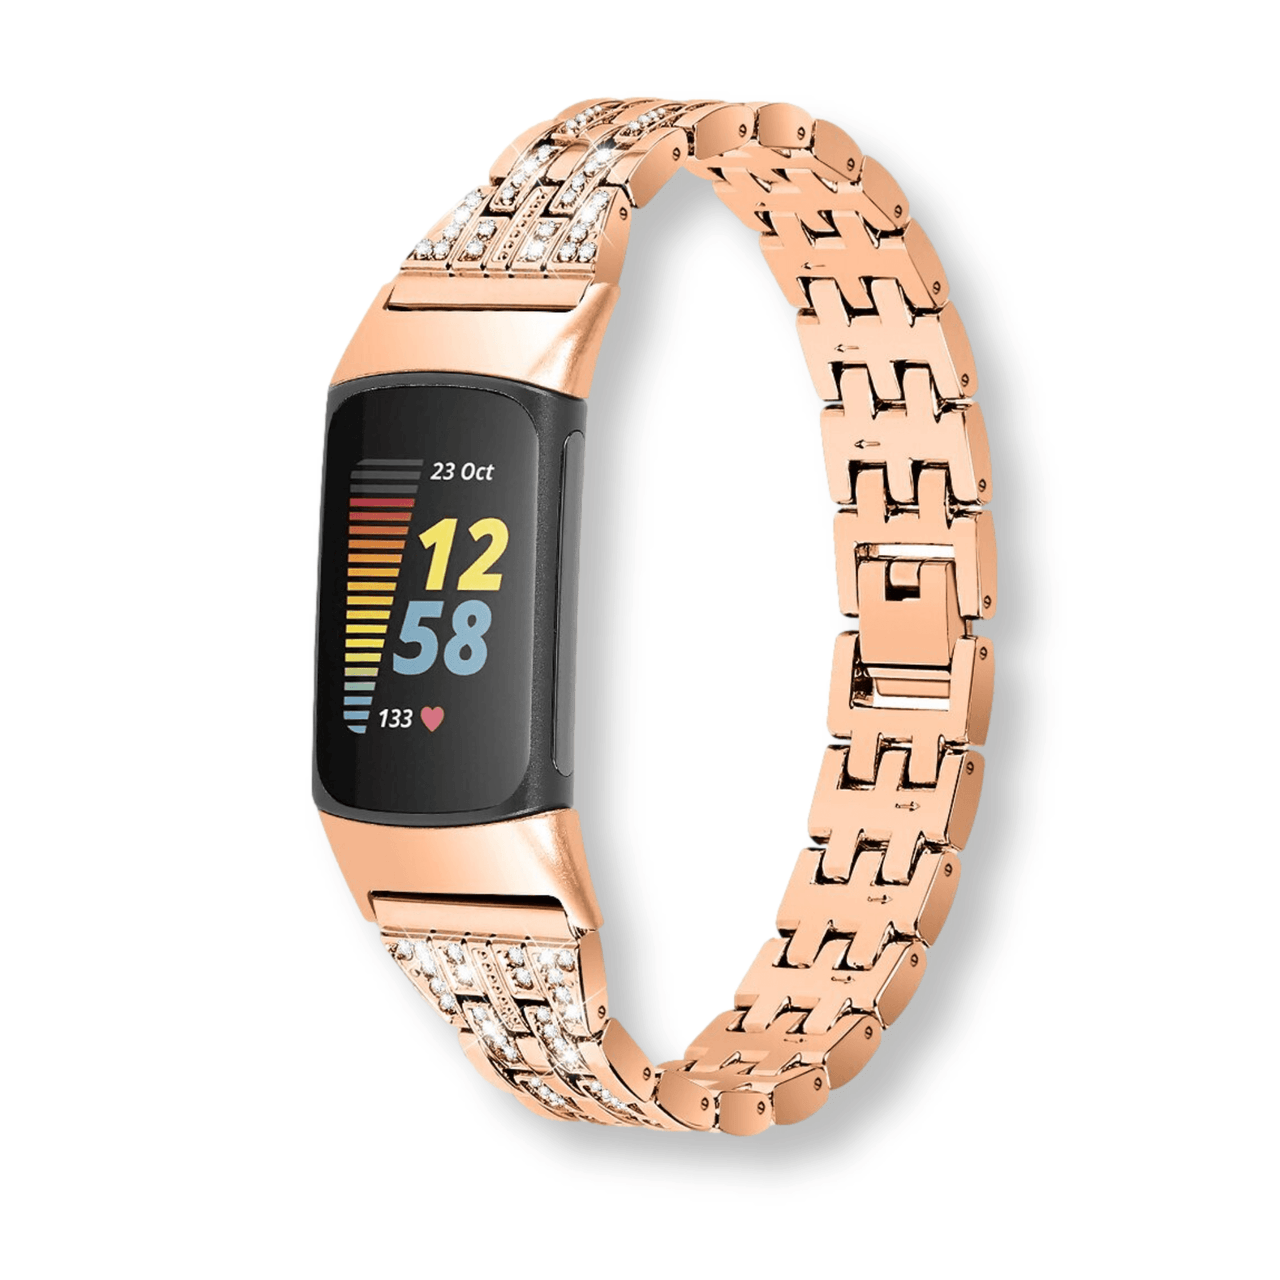 Bling Metal Wrist Band for Fitbit Charge 2 - 5 - watchband.direct